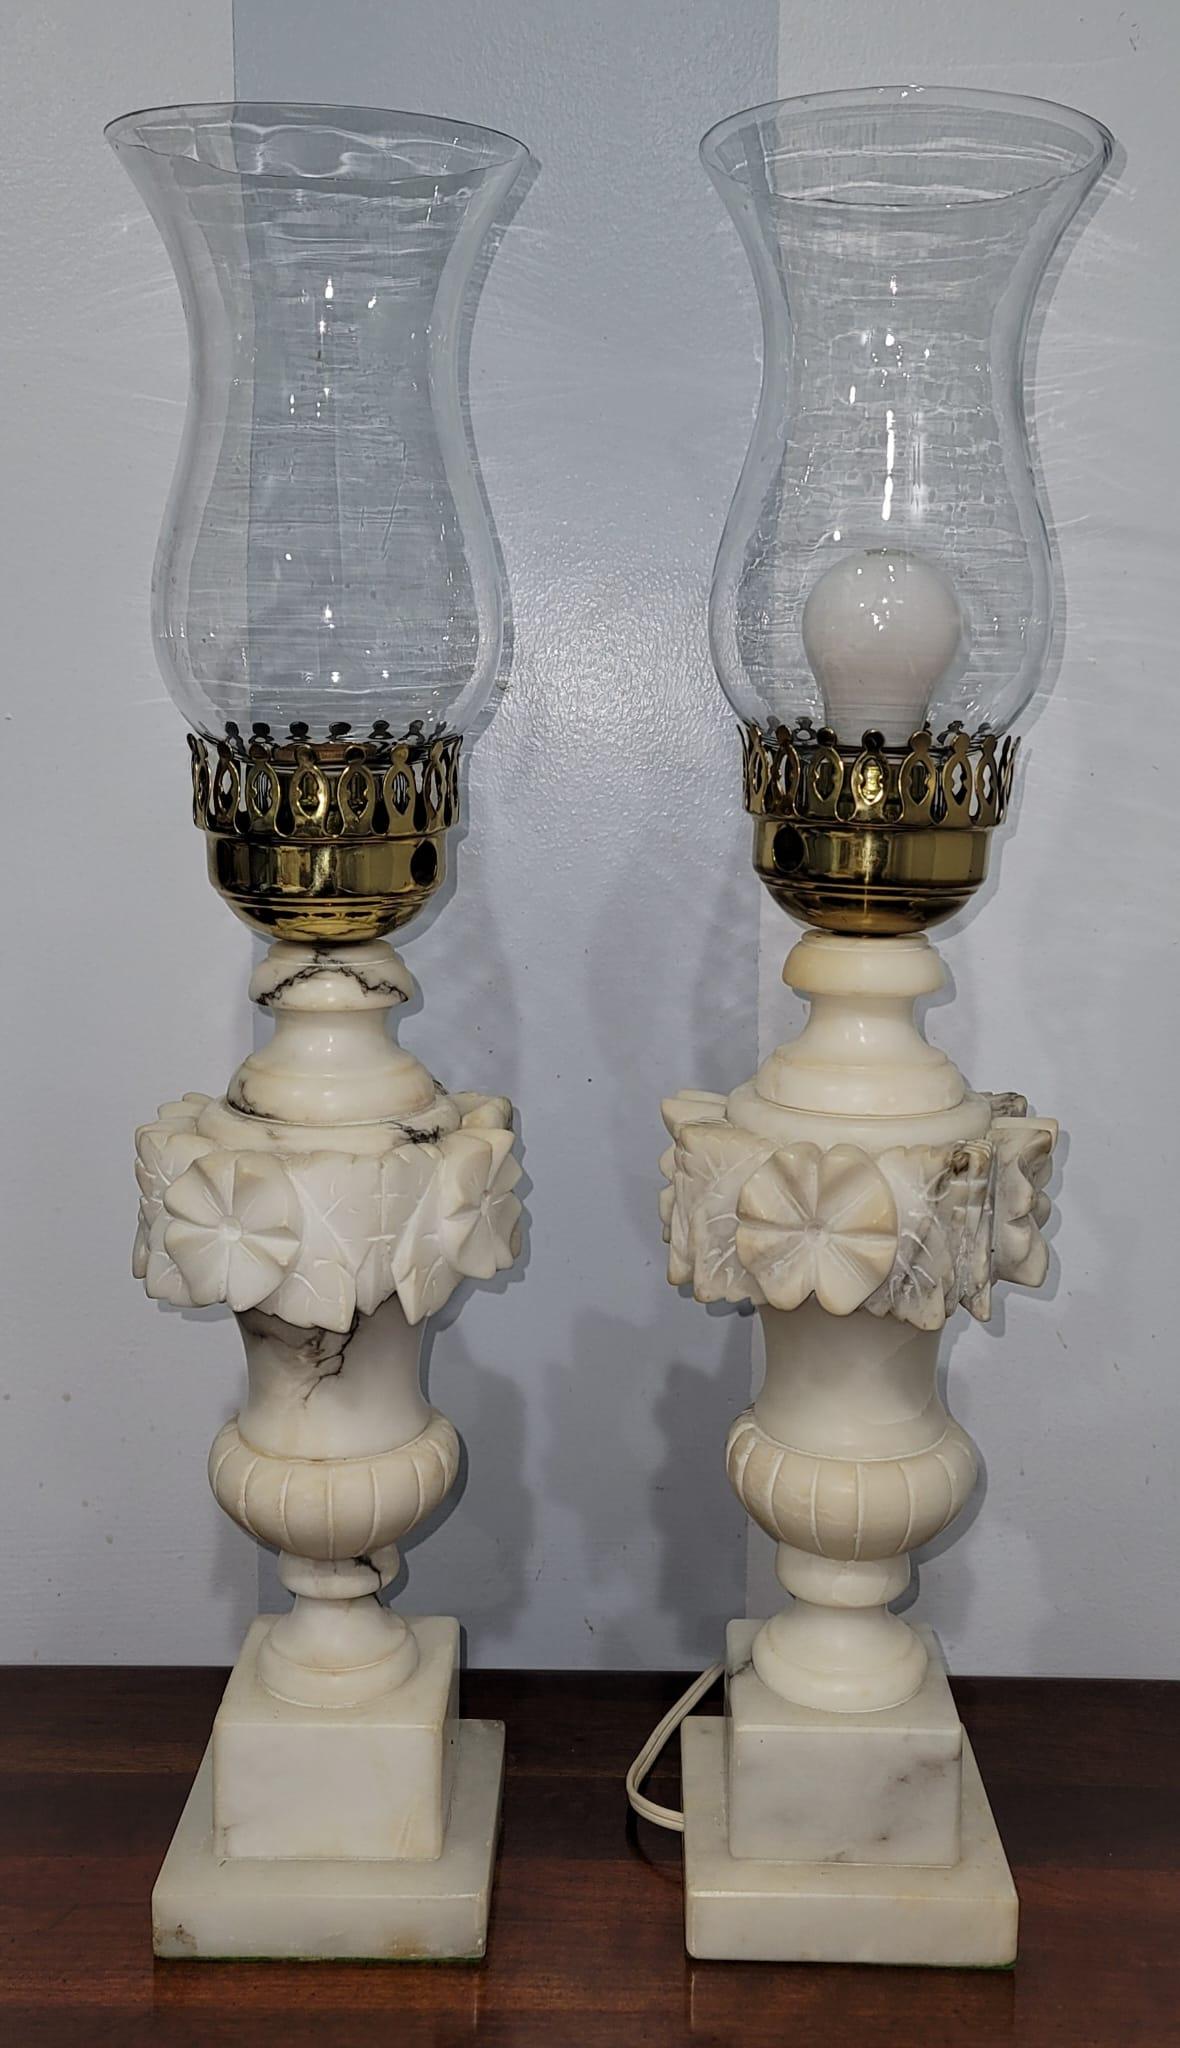 Pair of Vintage Italian Marble Lantern Table Lamps, Circa 1960s For Sale 1